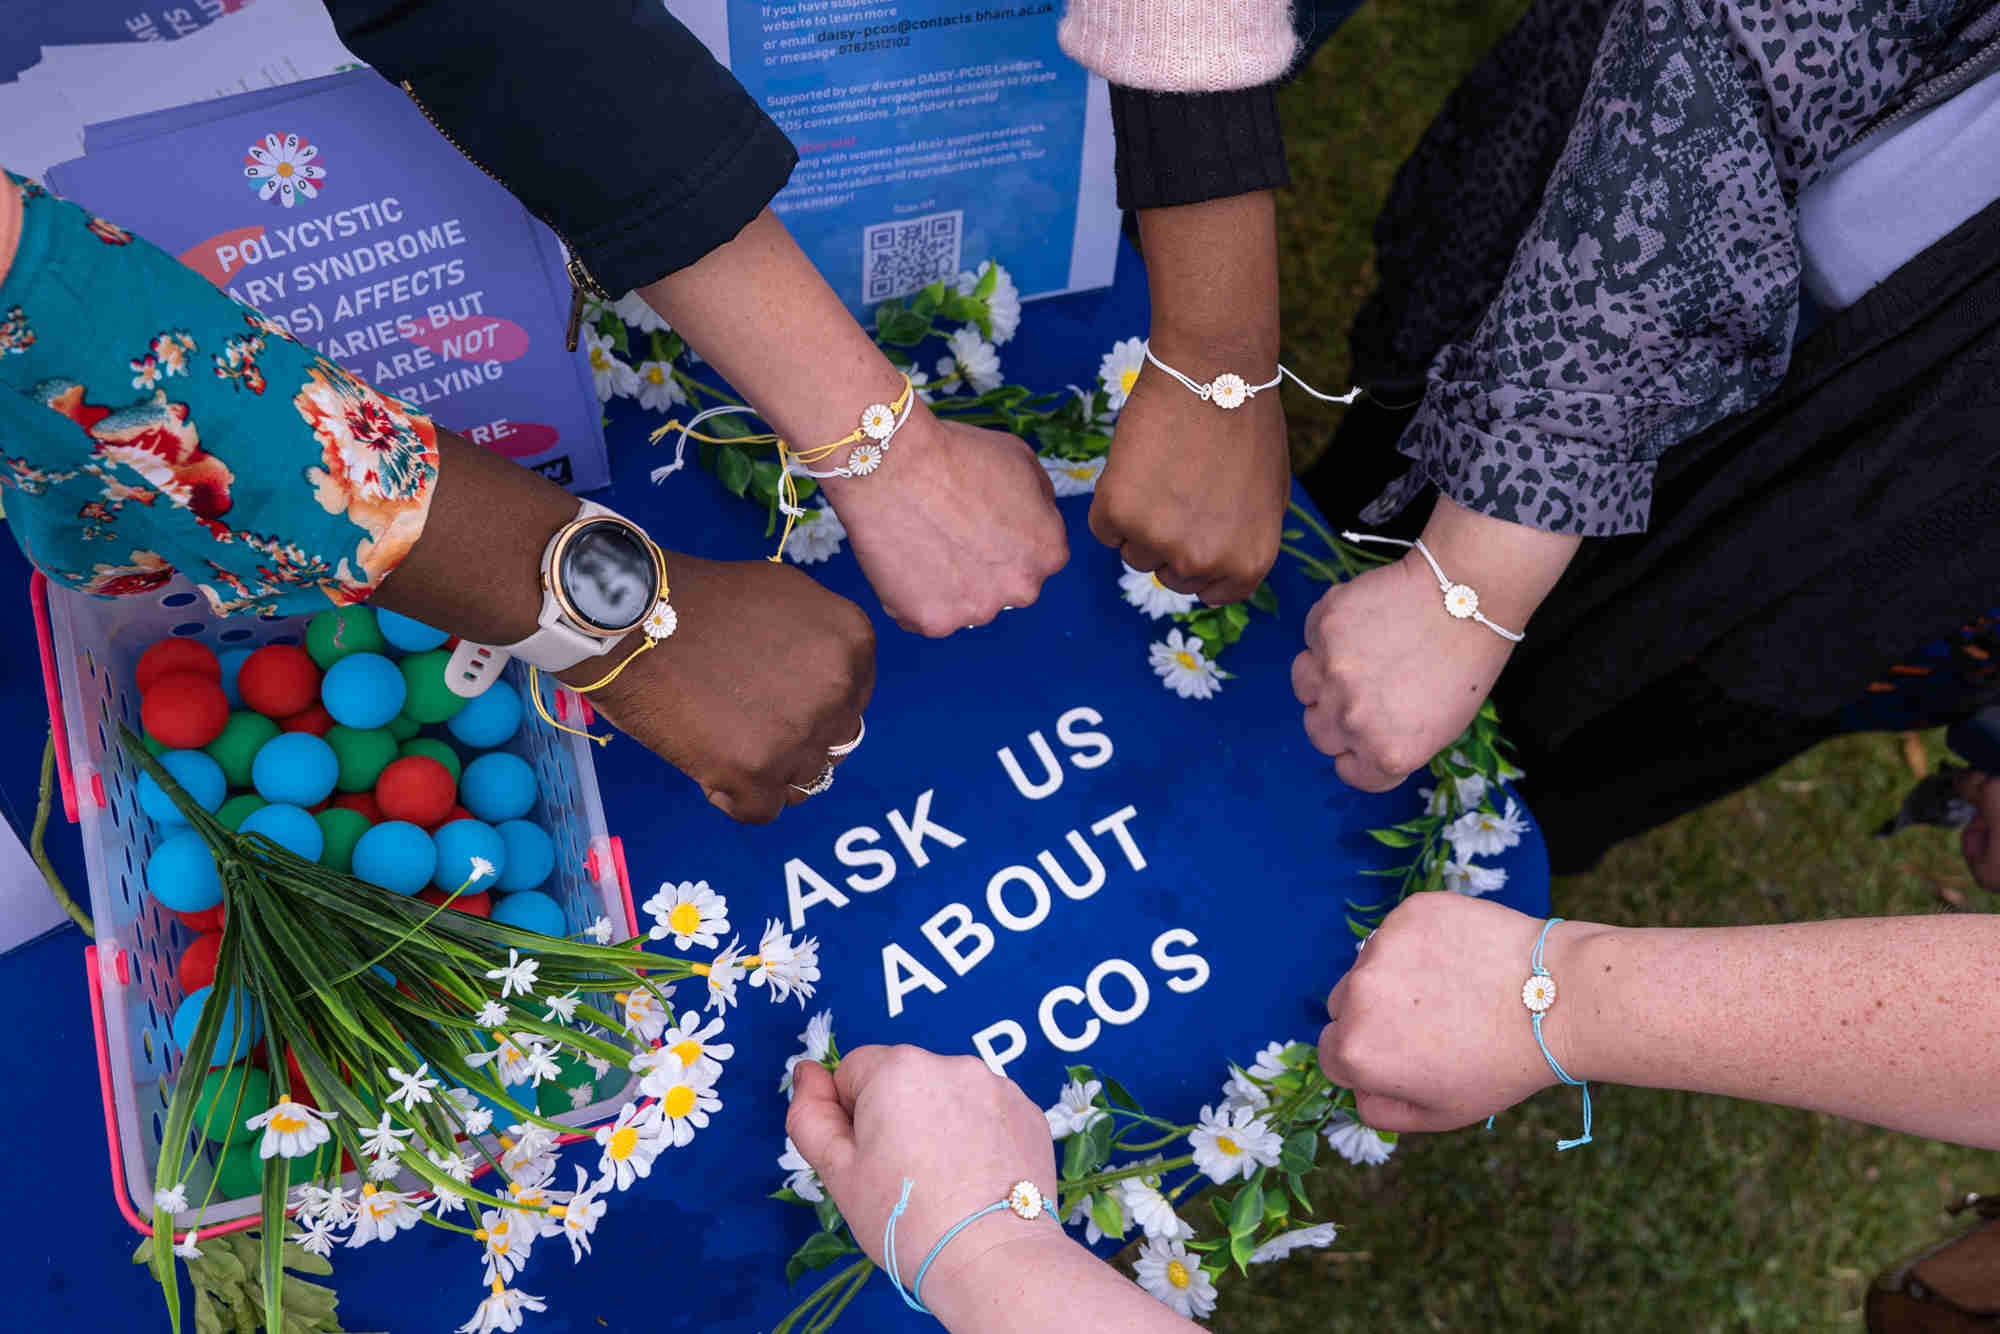 Involvement of the ‘DAISy–PCOS Leaders’ (diverse women with lived experience of polycystic ovary syndrome) in co-designing and co-delivering community engagement activities to raise awareness about PCOS and our research. Photo Hayley Salter